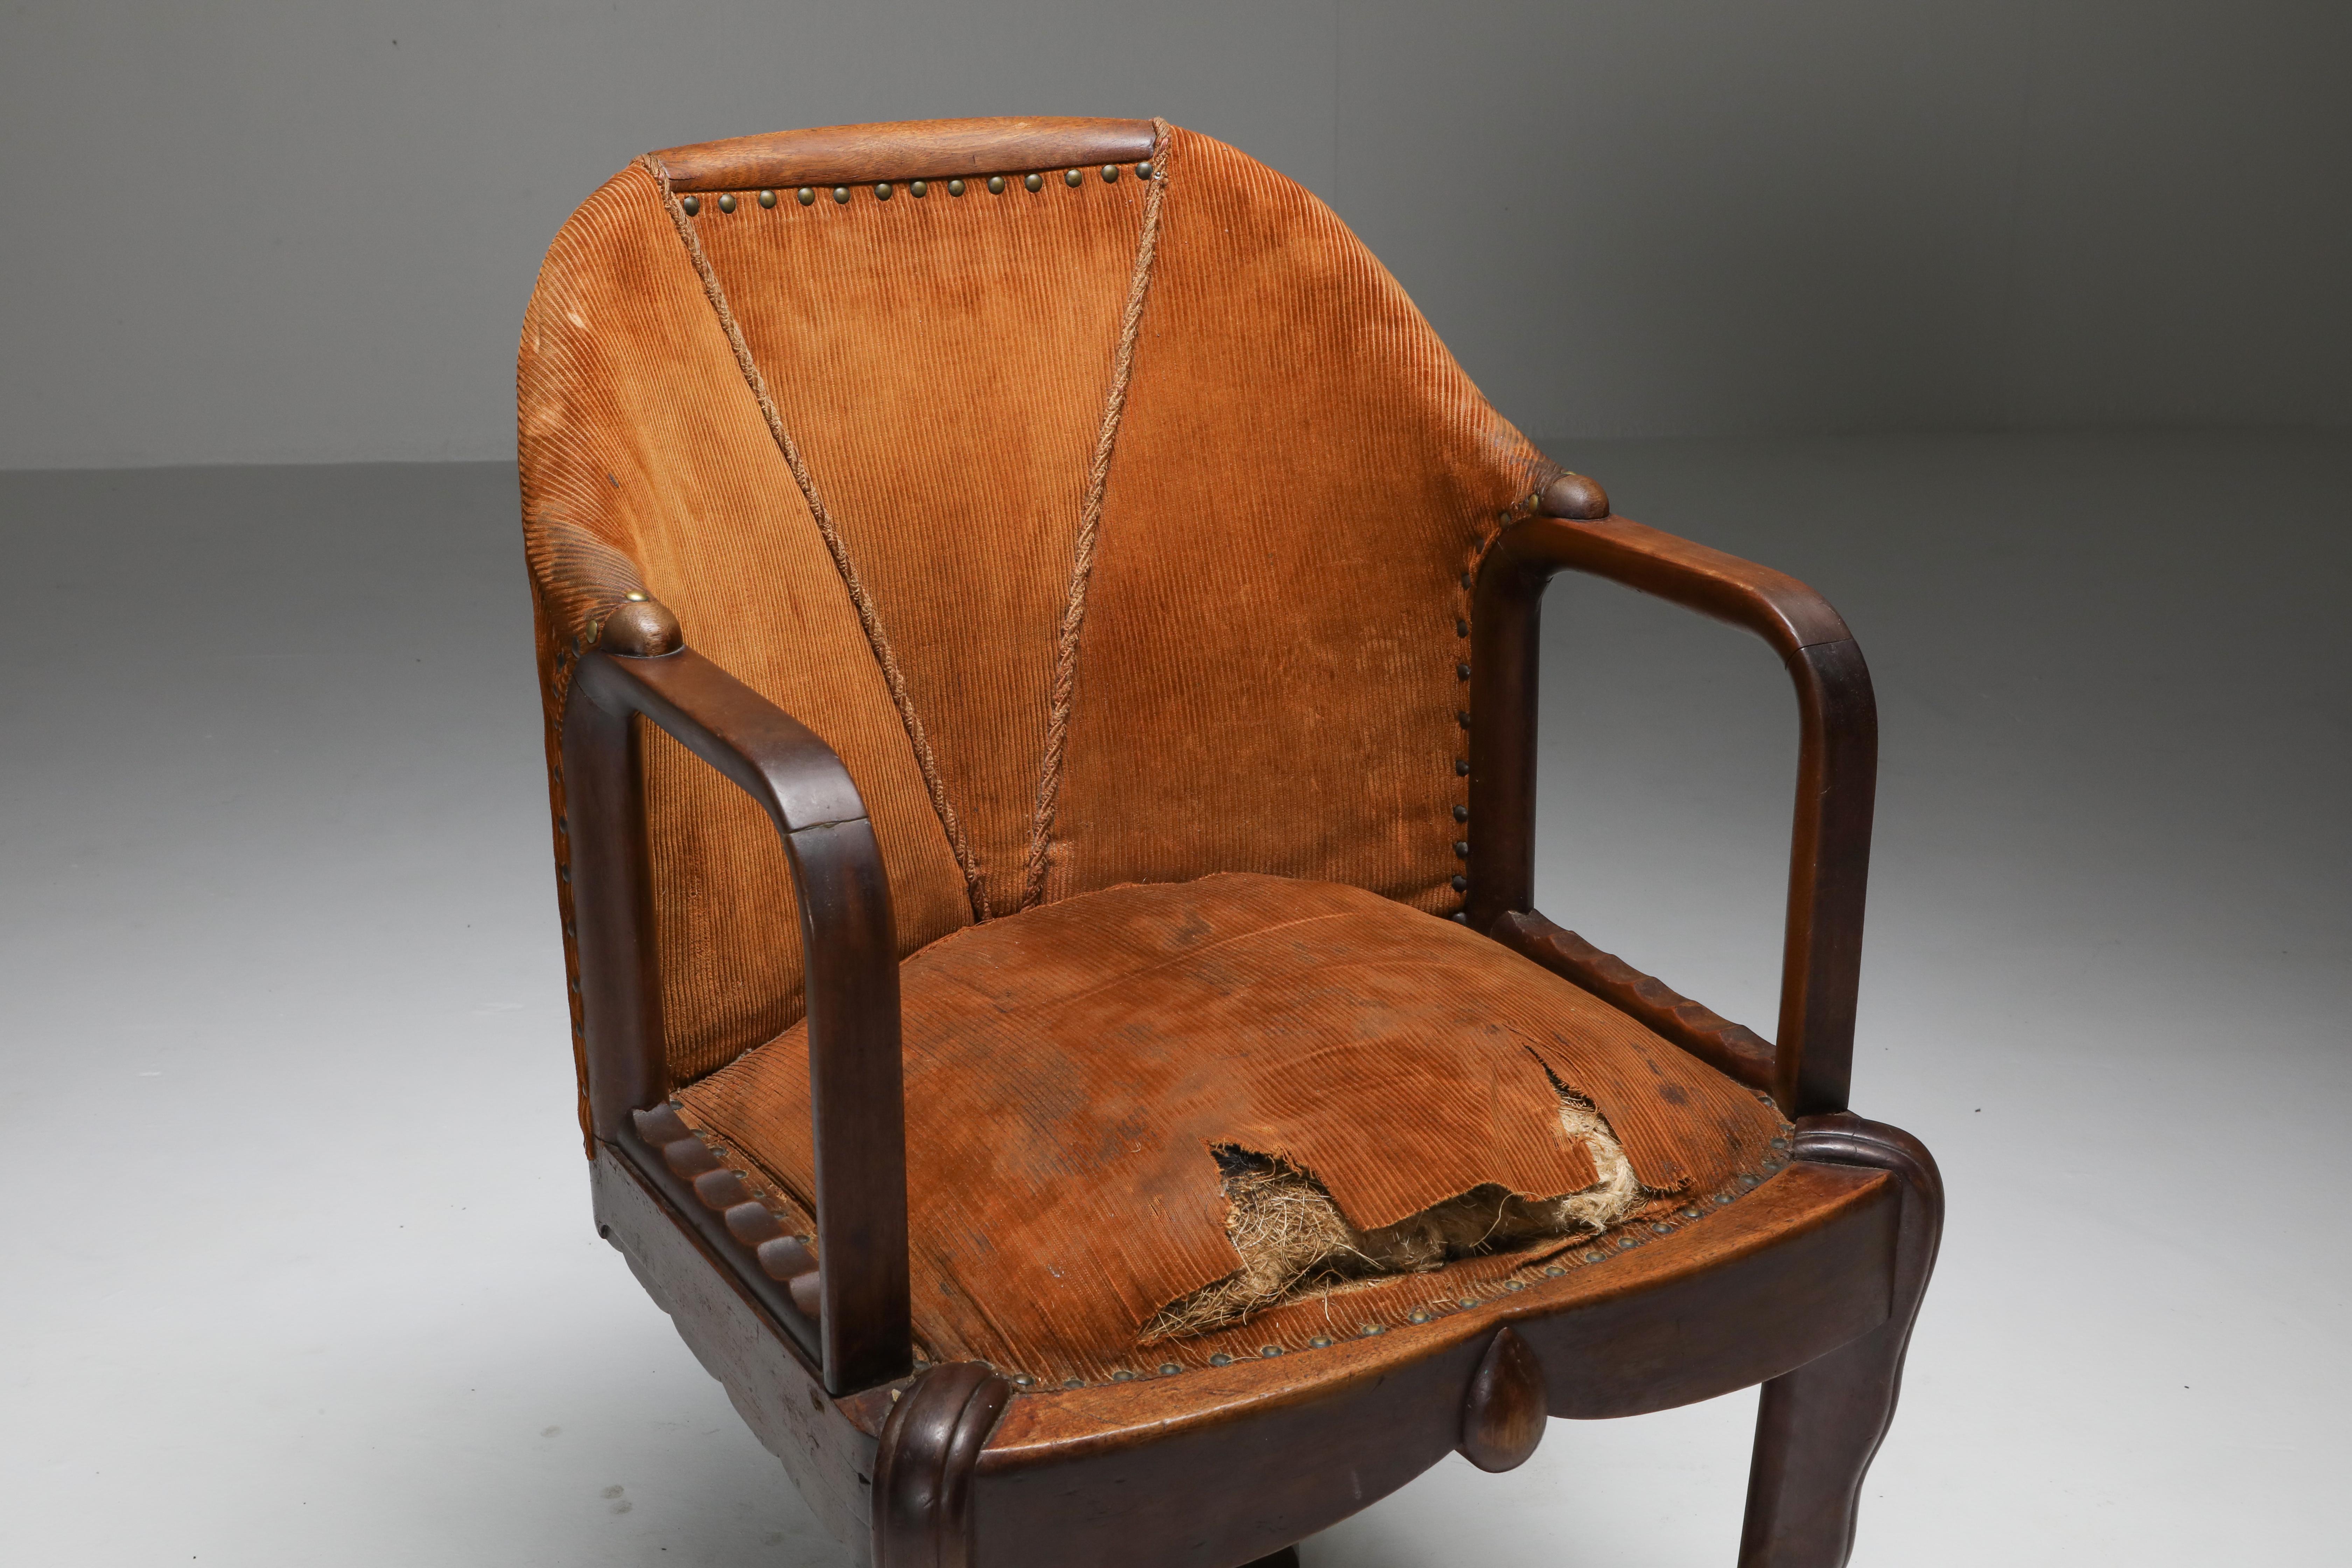 Early 20th Century Amsterdam School Chair 't Woonhuys